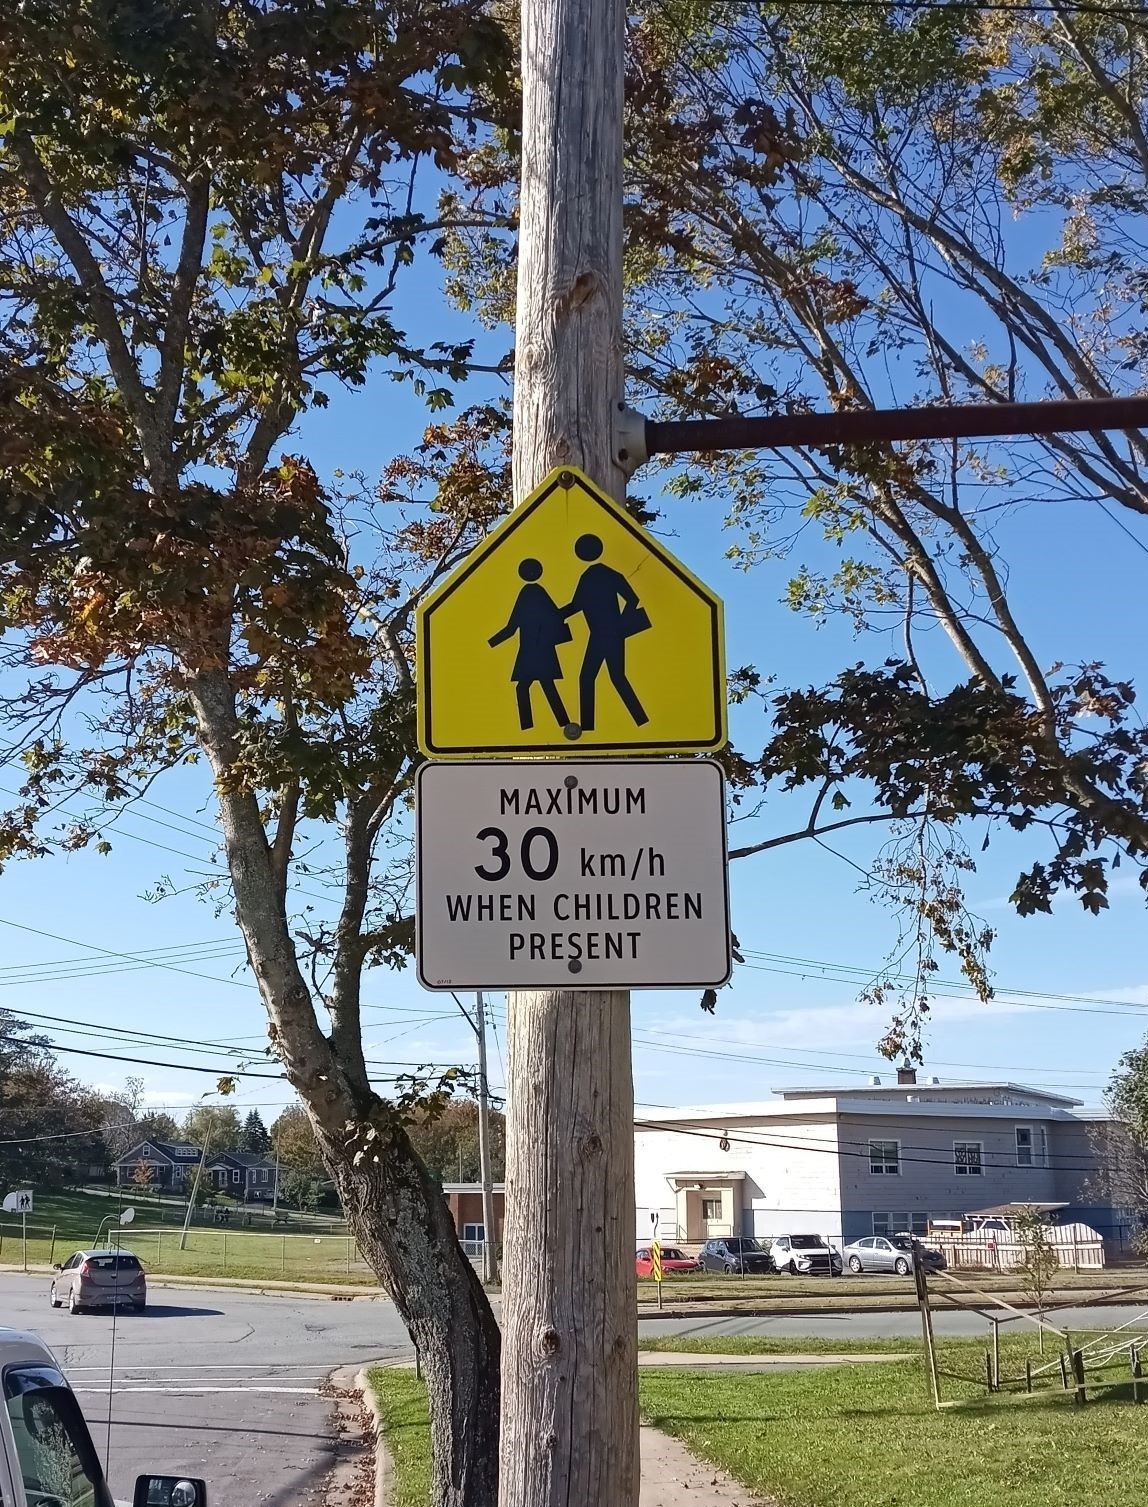 School zone sign. Speed limit is reduced to 30 km per hour when children are present.